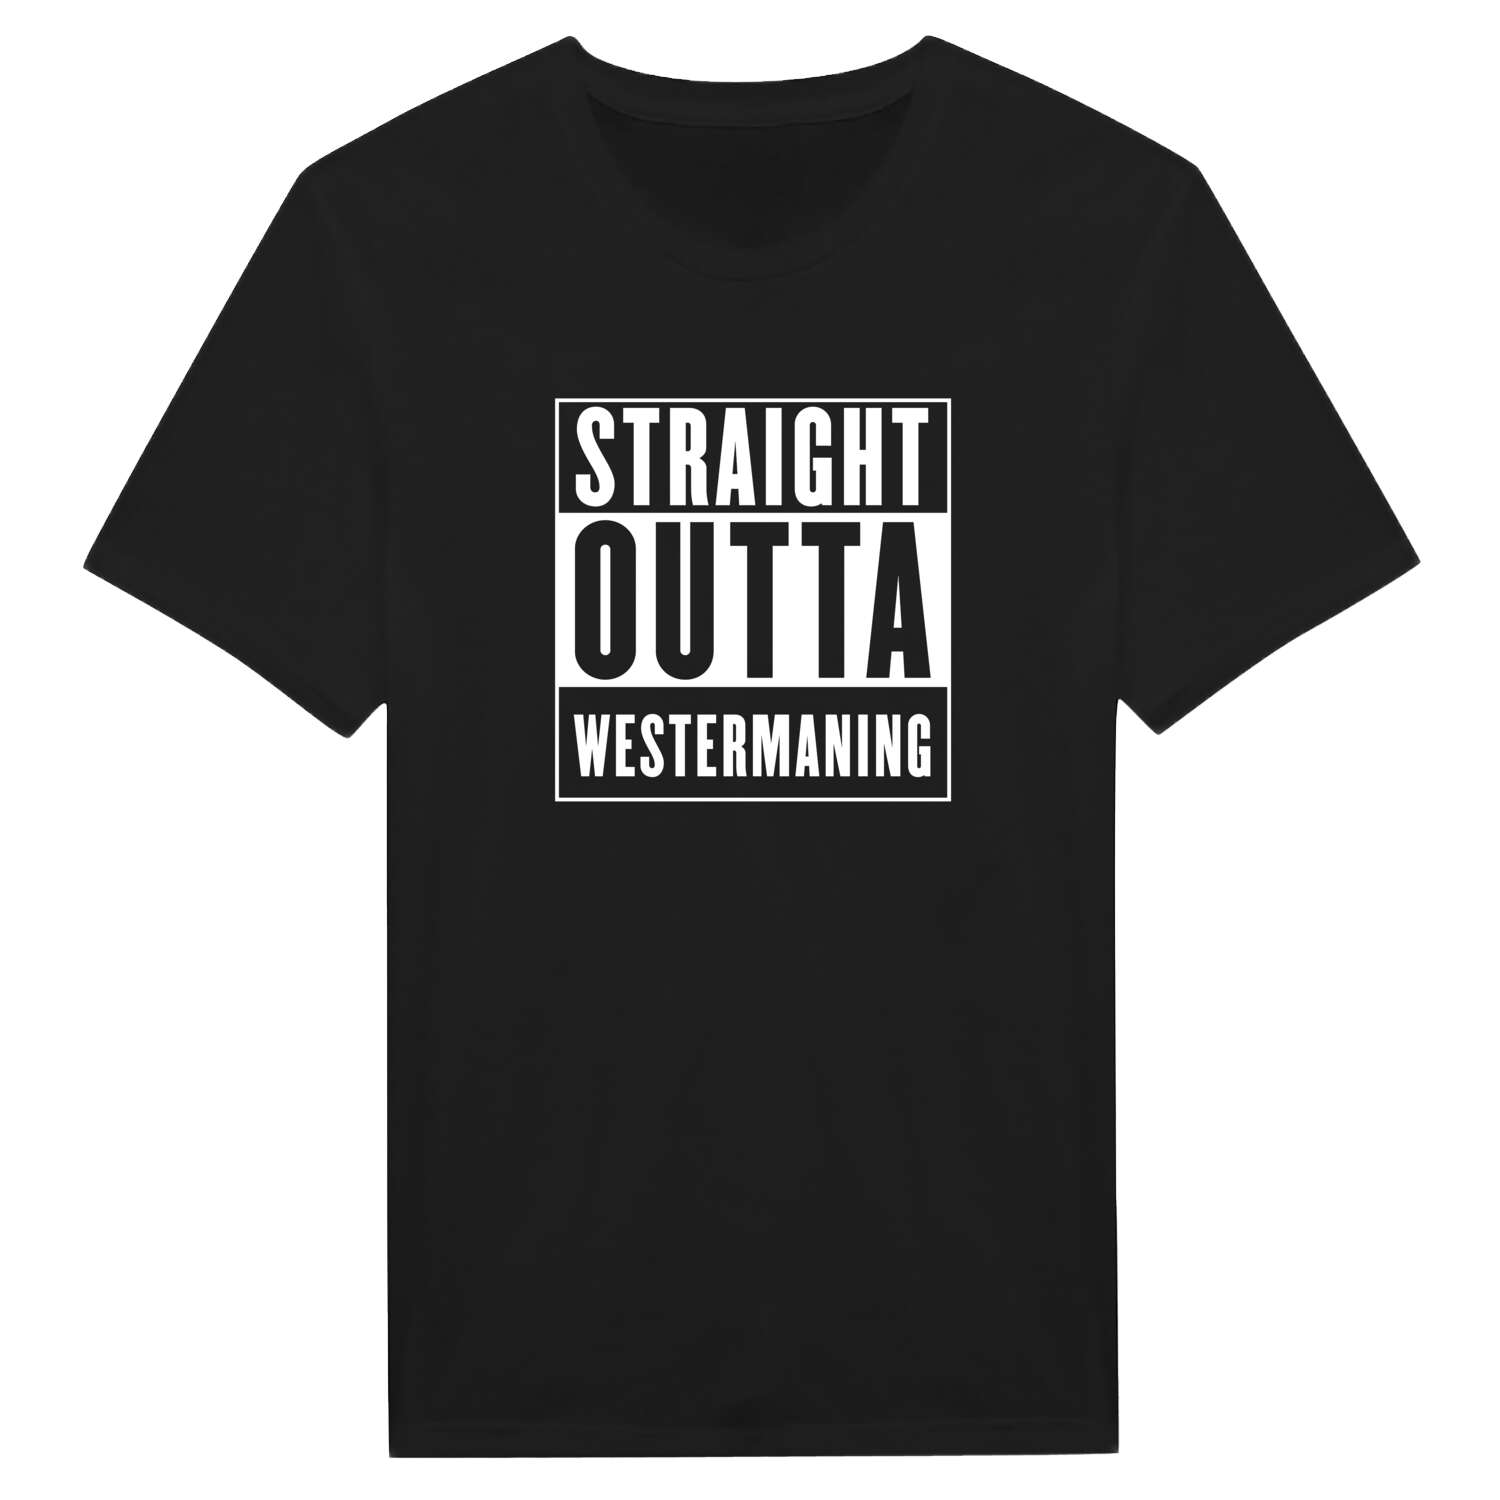 Westermaning T-Shirt »Straight Outta«